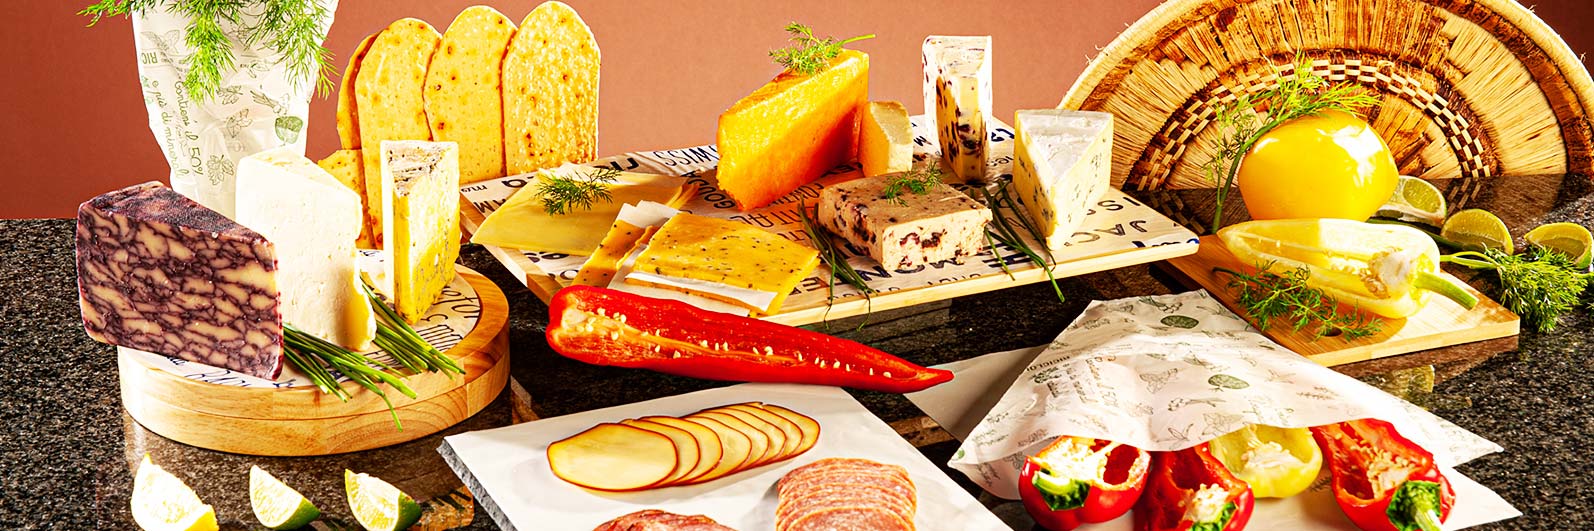 Suppliers of Cut-To-Size Food Packaging Solutions